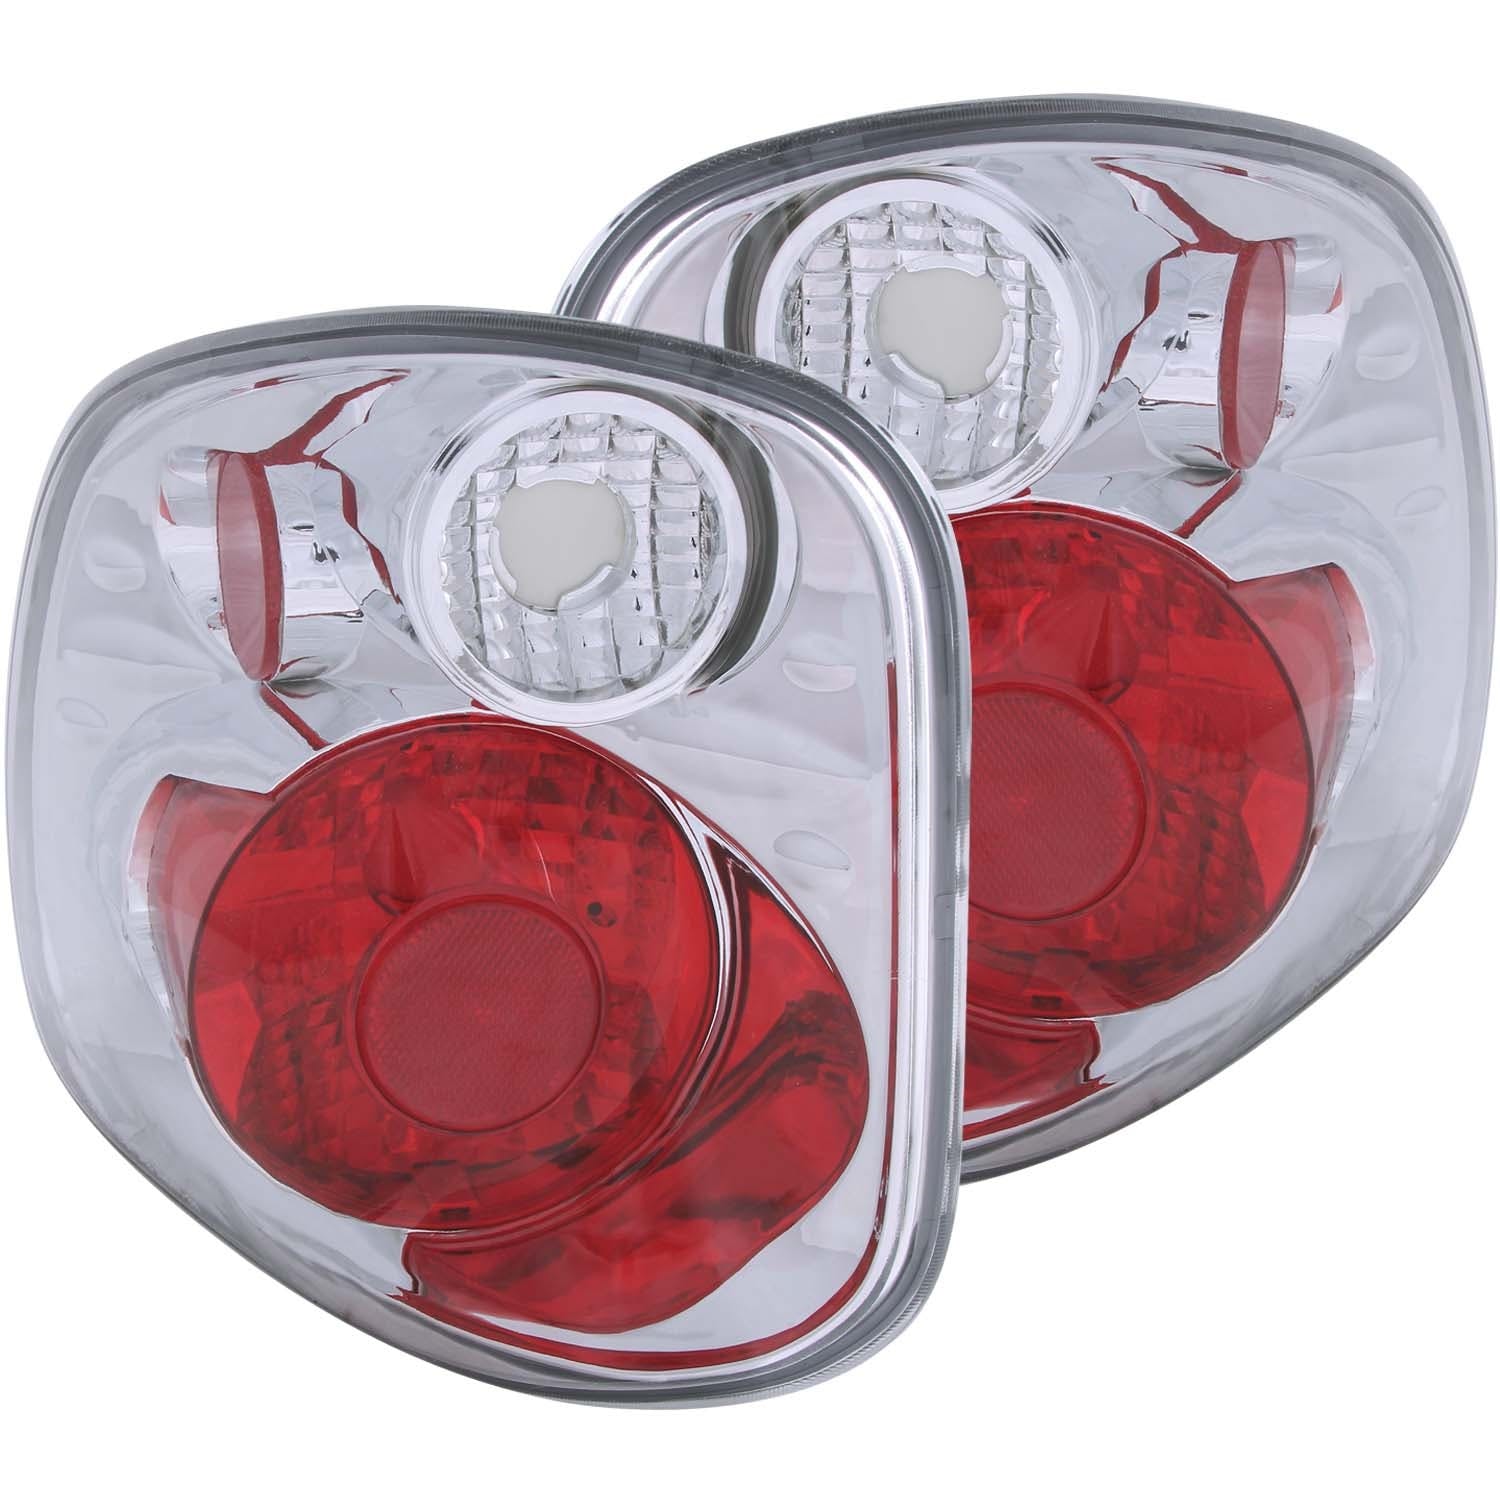 AnzoUSA 211066 Taillights Chrome